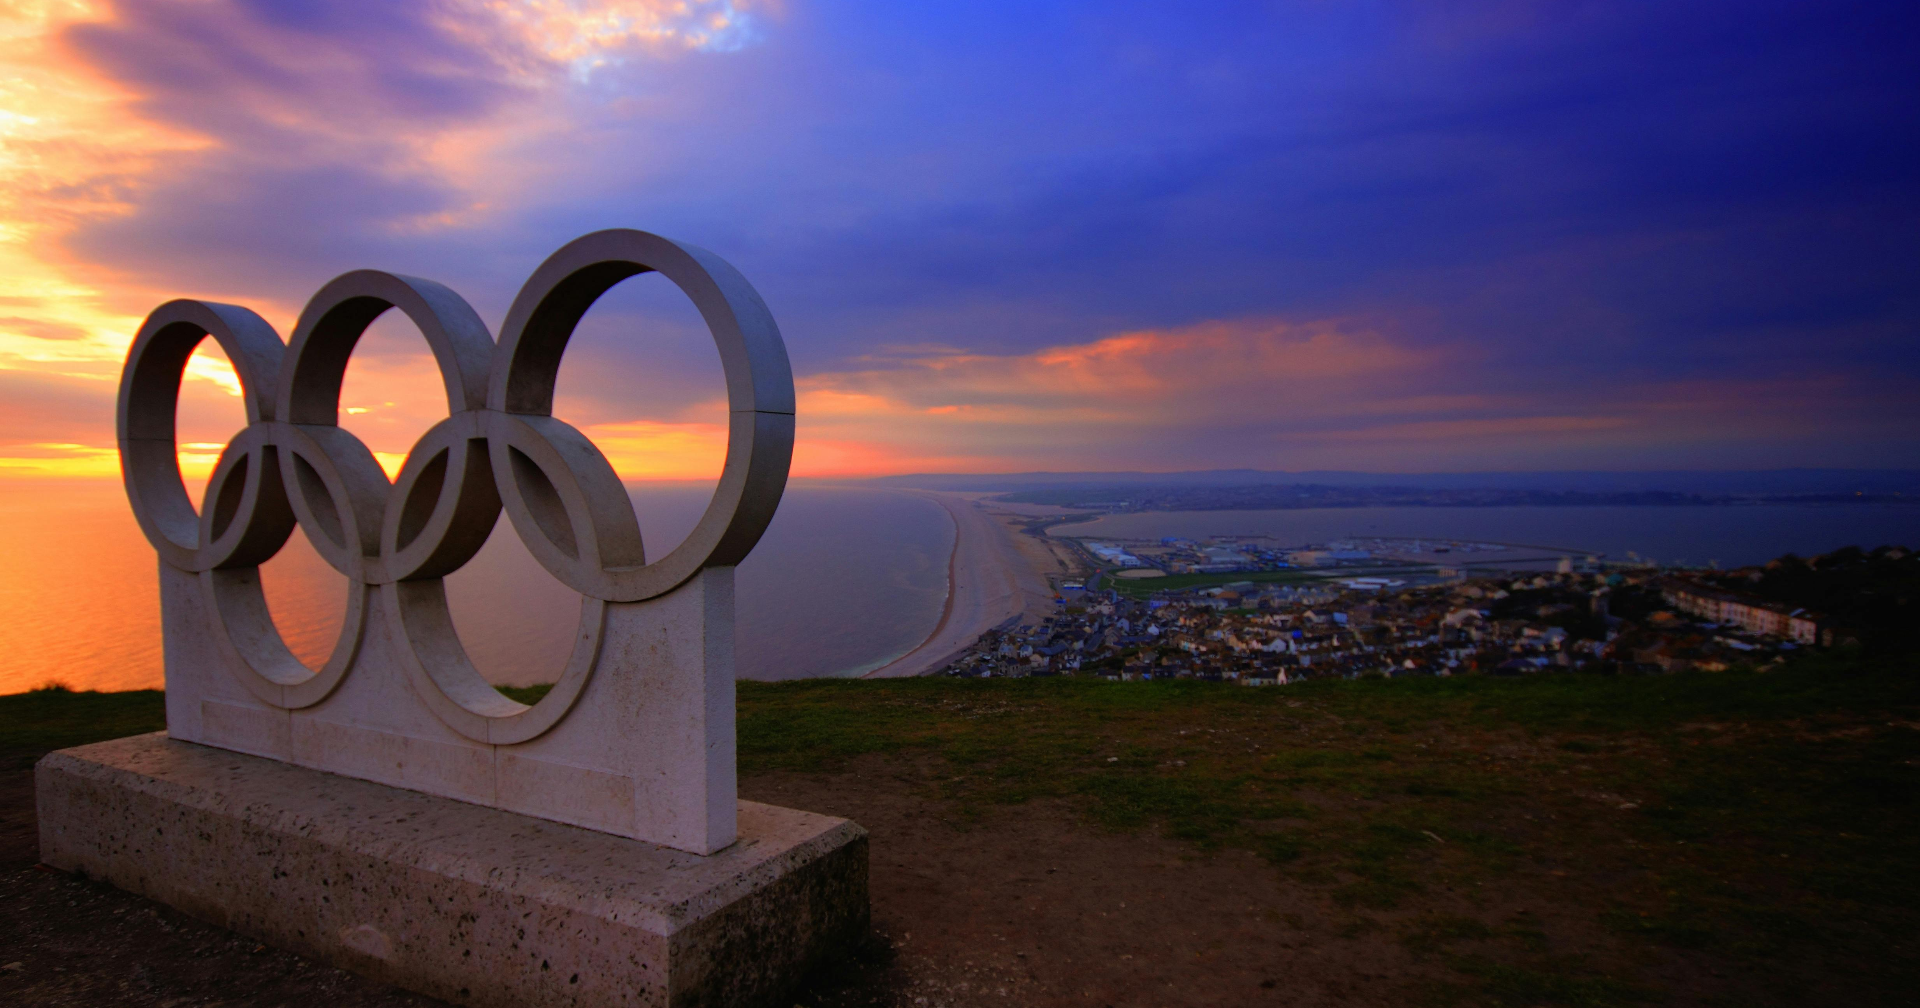 The 2024 Olympics are marginalizing the most vulnerable